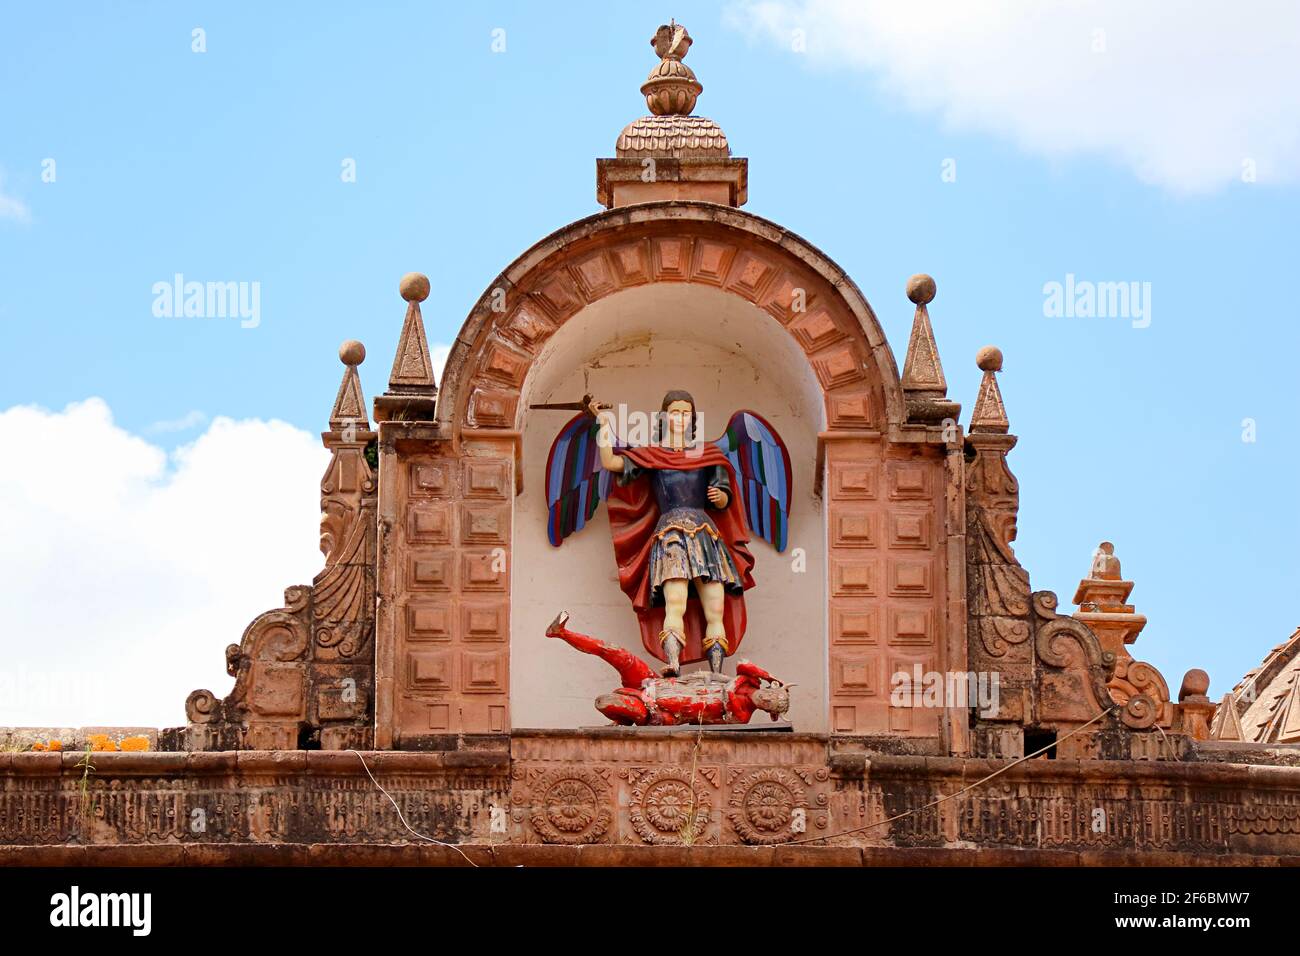 Impressive Statue of Archangel Michael Slaying the Devil on the Facade of Church of The Triumph, Cuzco, Peru Stock Photo